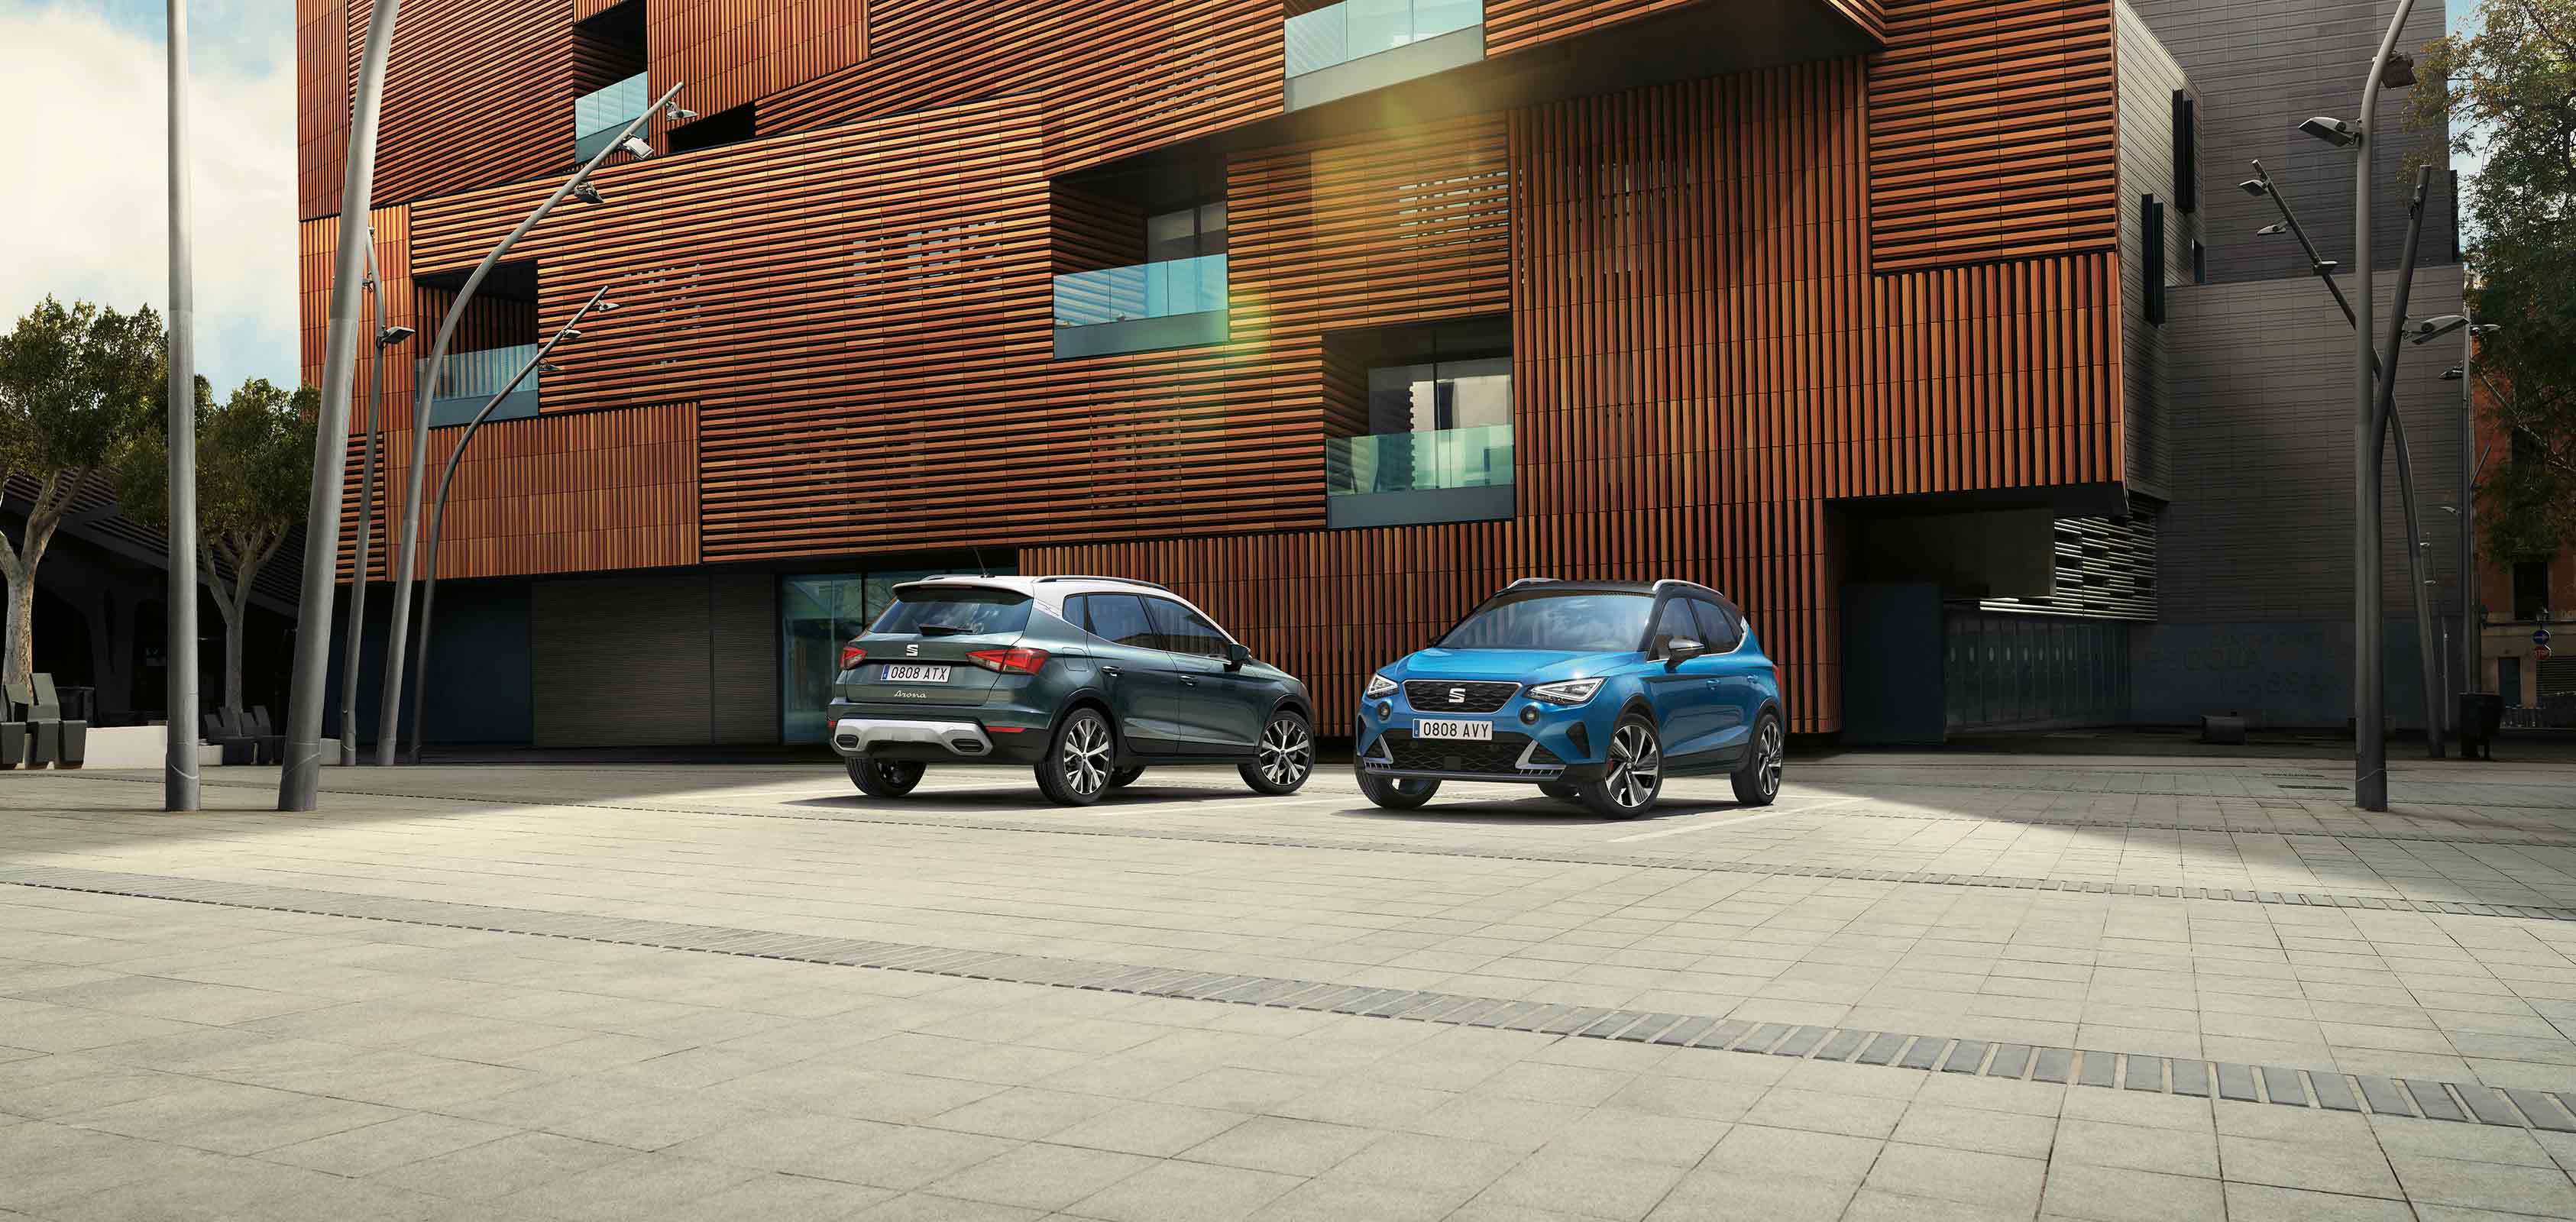 Two SEAT Arona parked, one dark camouflage colour and another Sapphire Blue colour